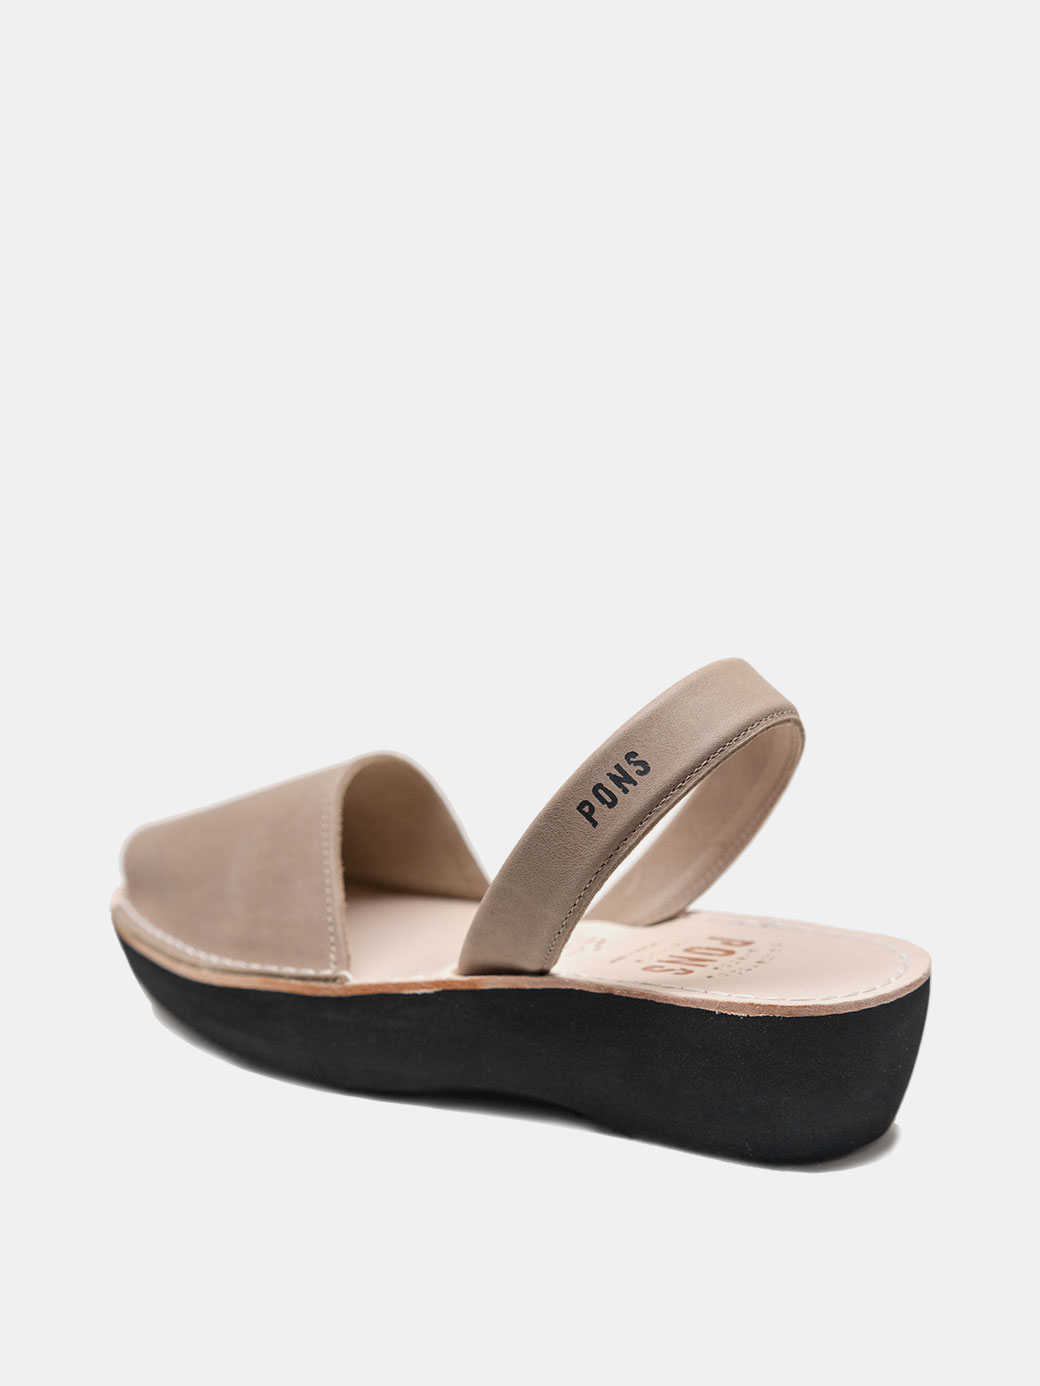 Classic Taupe Platform Pons Shoes side